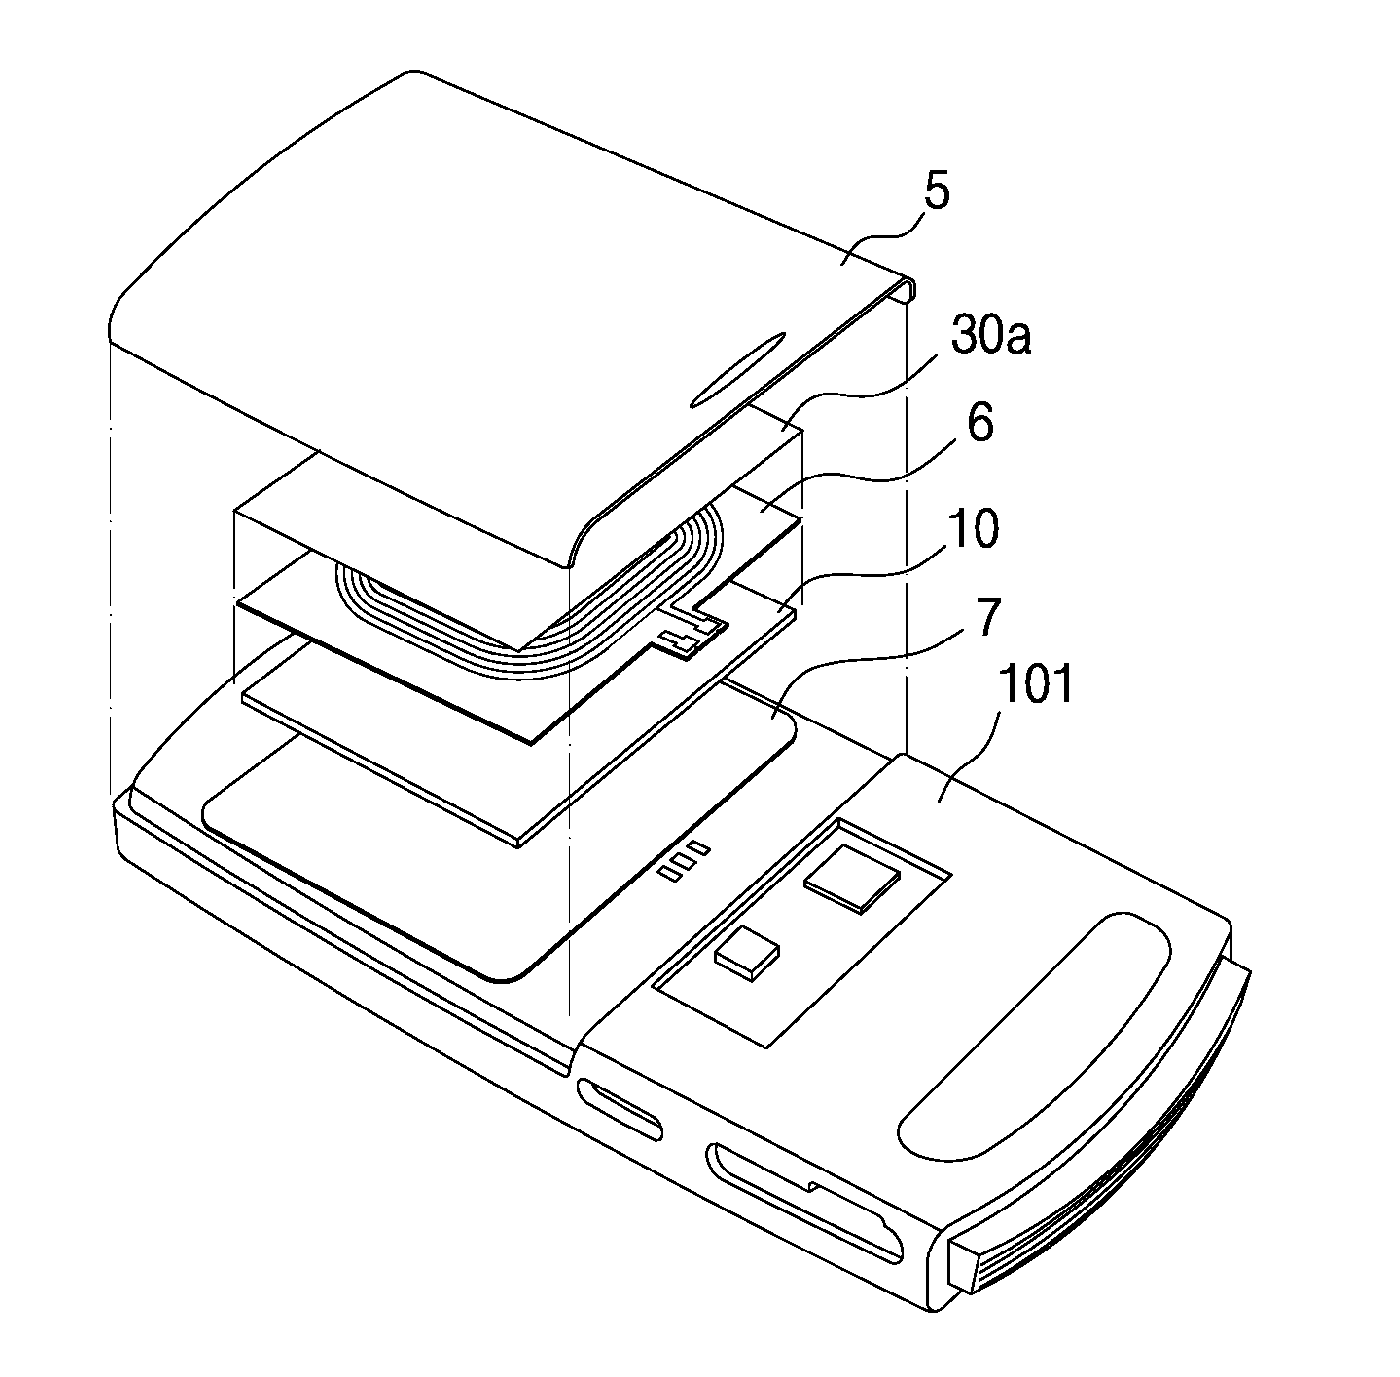 Magnetic field shielding sheet for a wireless charger, method for manufacturing same, and receiving apparatus for a wireless charger using the sheet